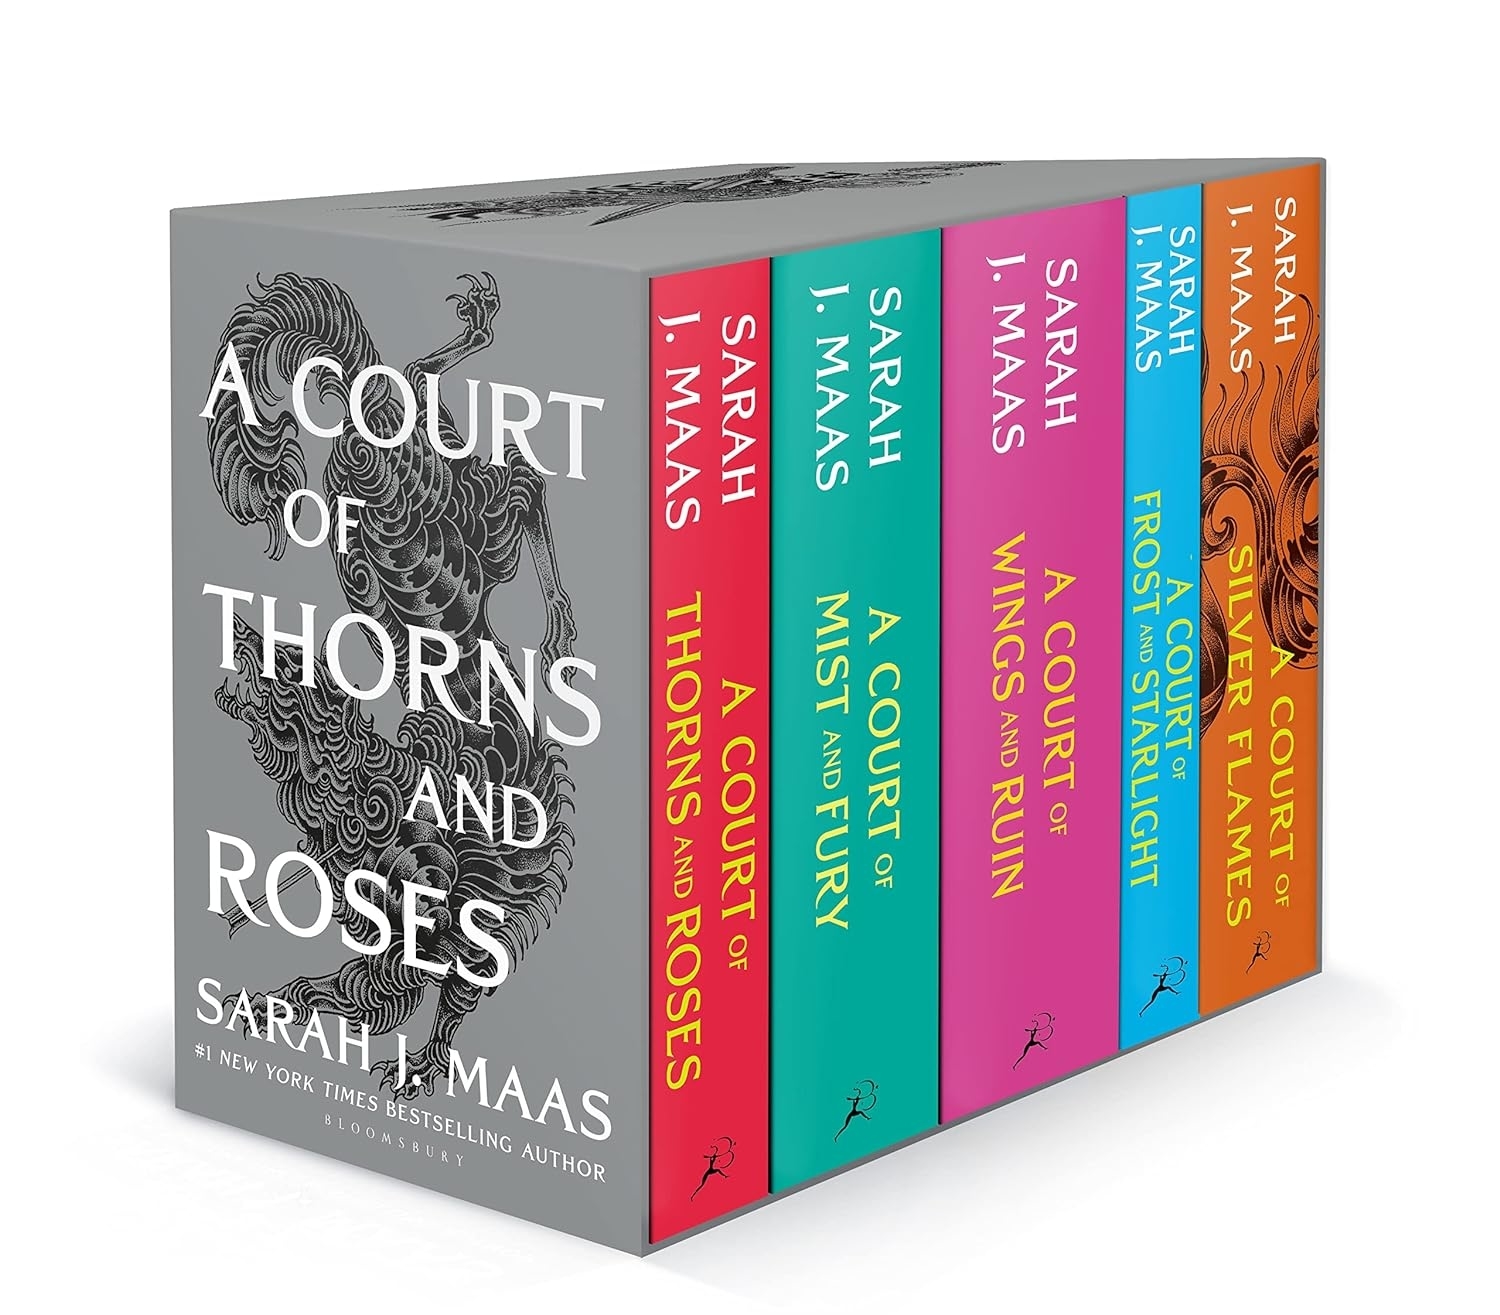 A boxed set of &#x27;A Court of Thorns and Roses&#x27; series by Sarah J. Maas with visible titles and ornate cover art